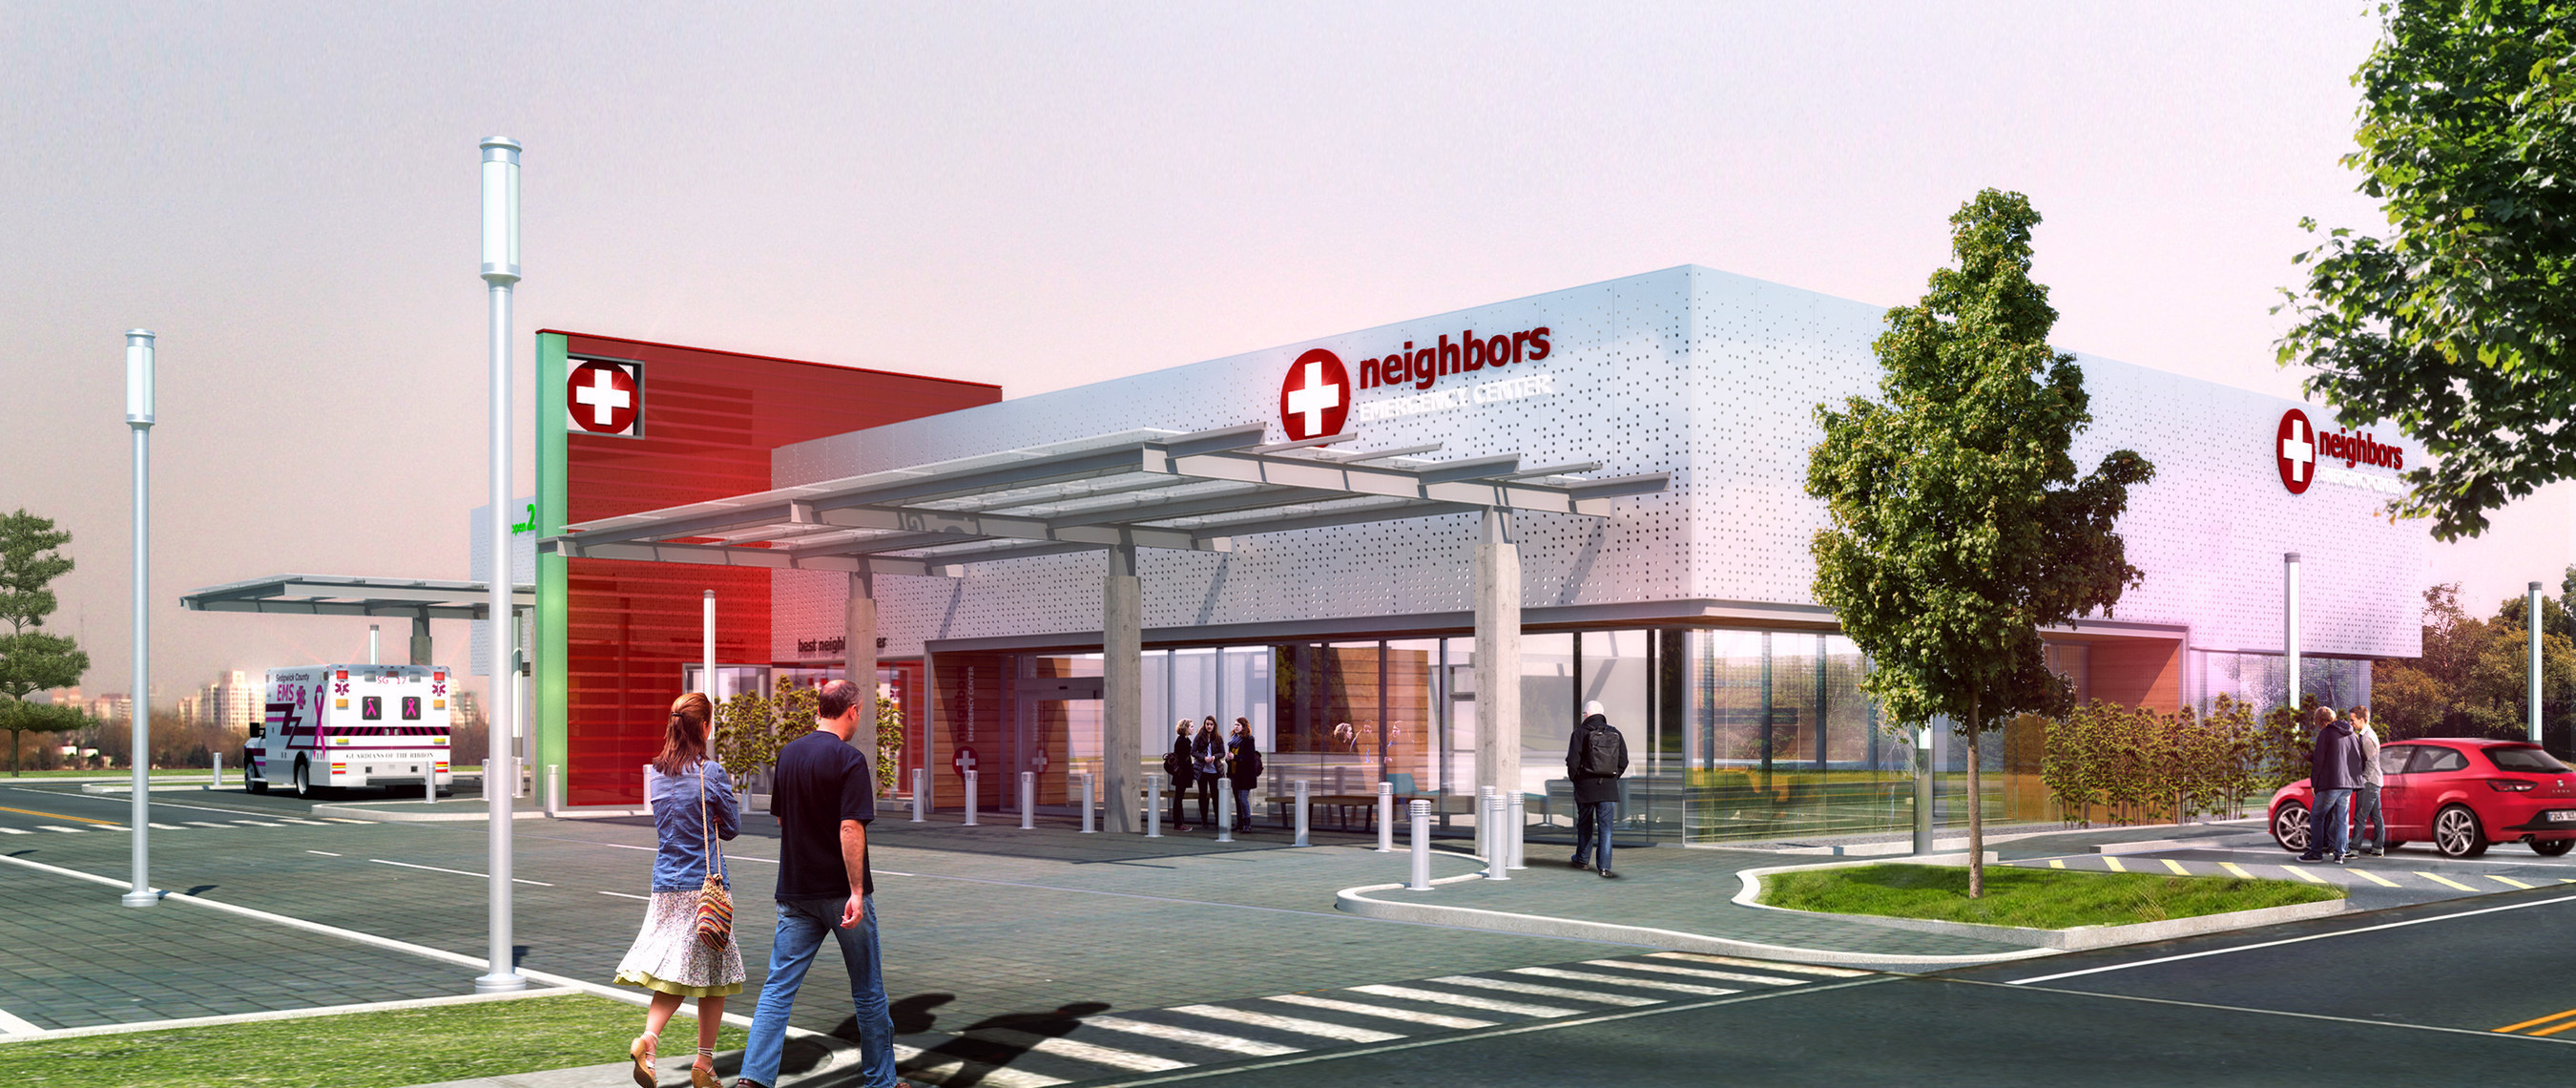 A rendering of the new San Angelo Neighbors Emergency Center, opening August 27th, 2016.